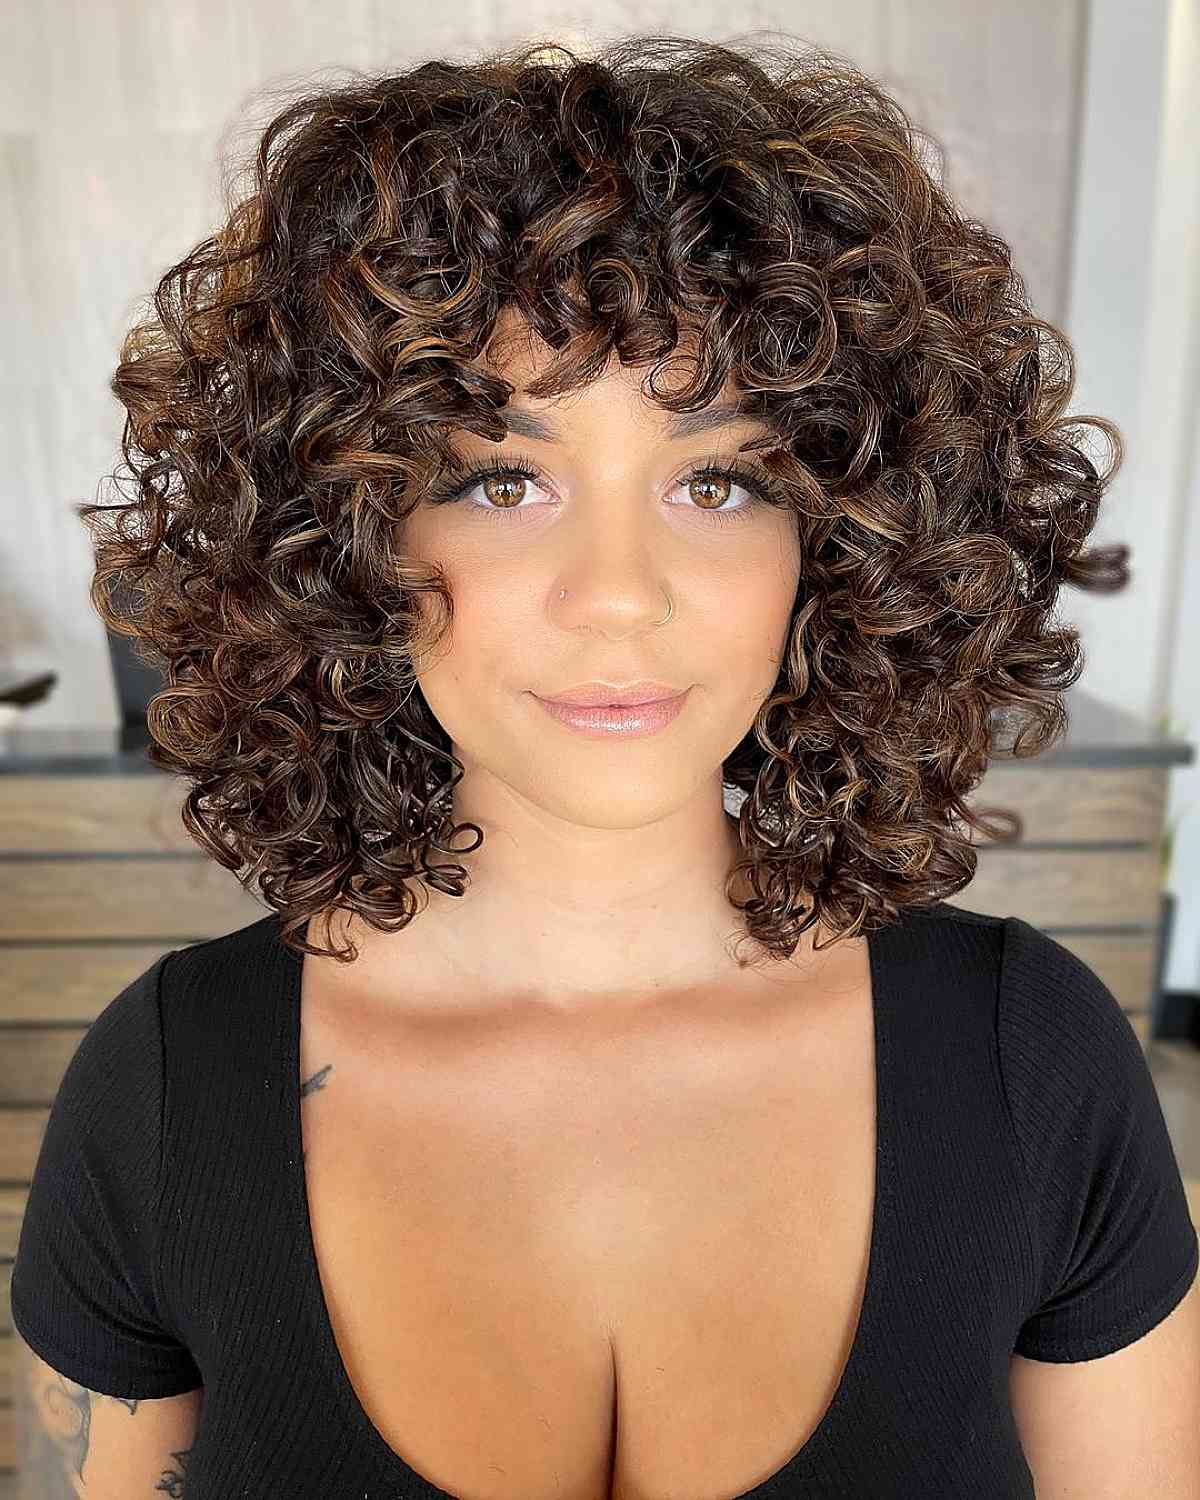 modern short curly hairstyle with brown highlights for natural curls